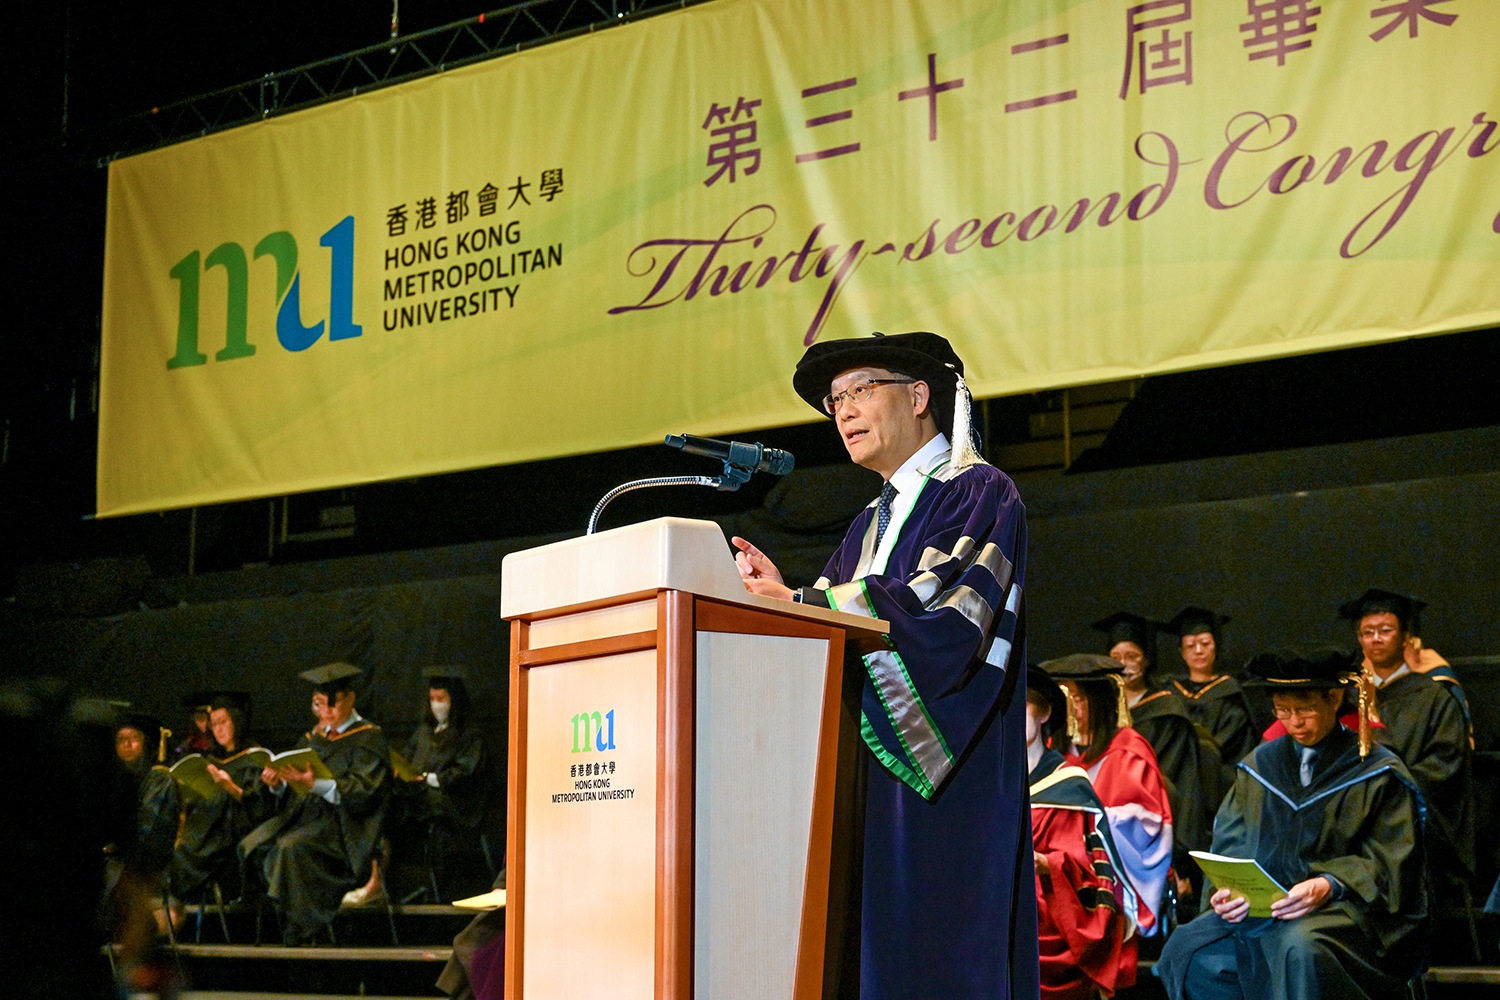 Addressing the ceremony, President Prof. Paul Lam Kwan-sing urges the graduates to embrace the AI revolution to create infinite possibilities.